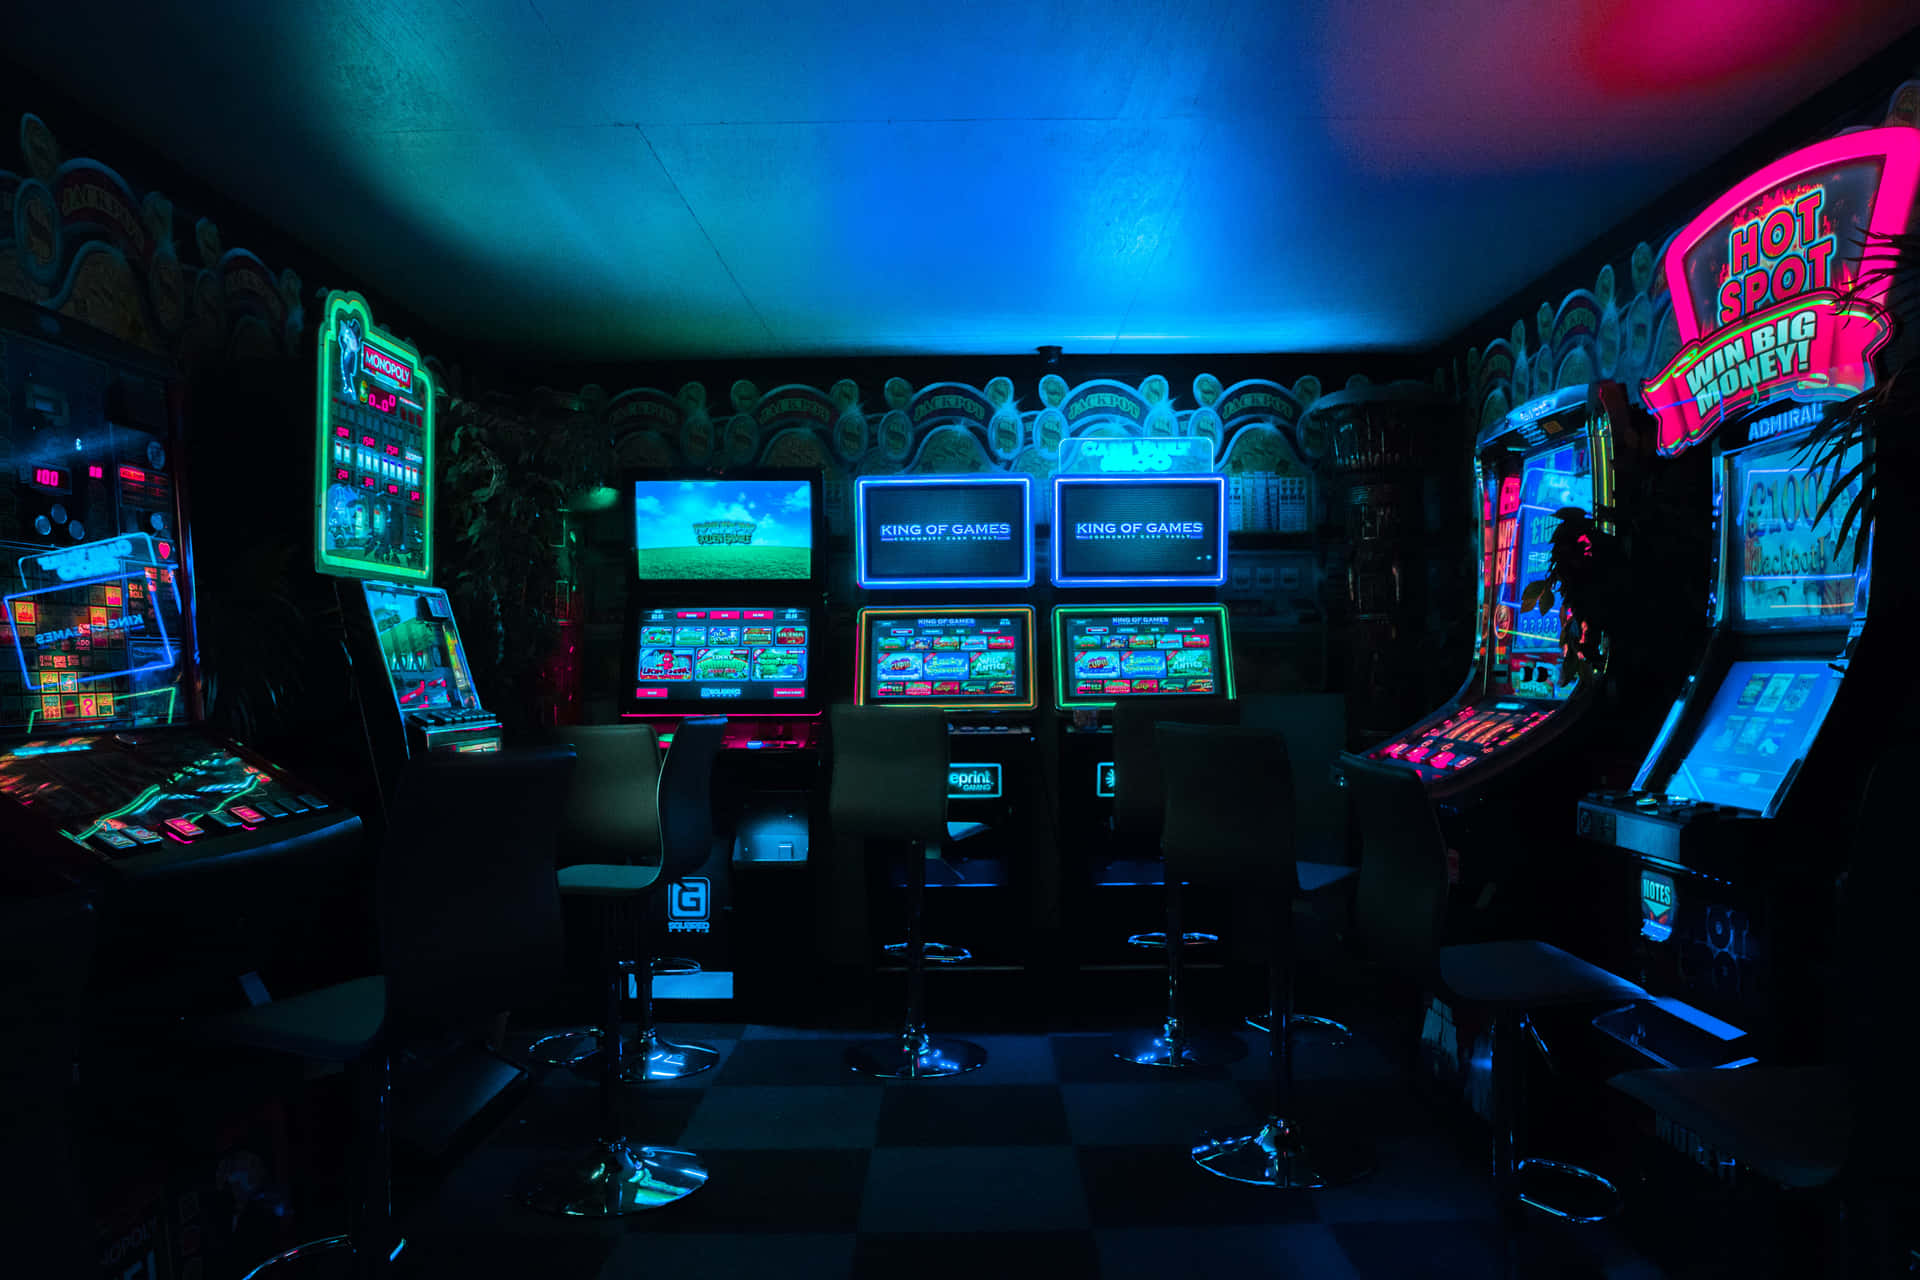 Feel the nostalgia with this classic arcade background